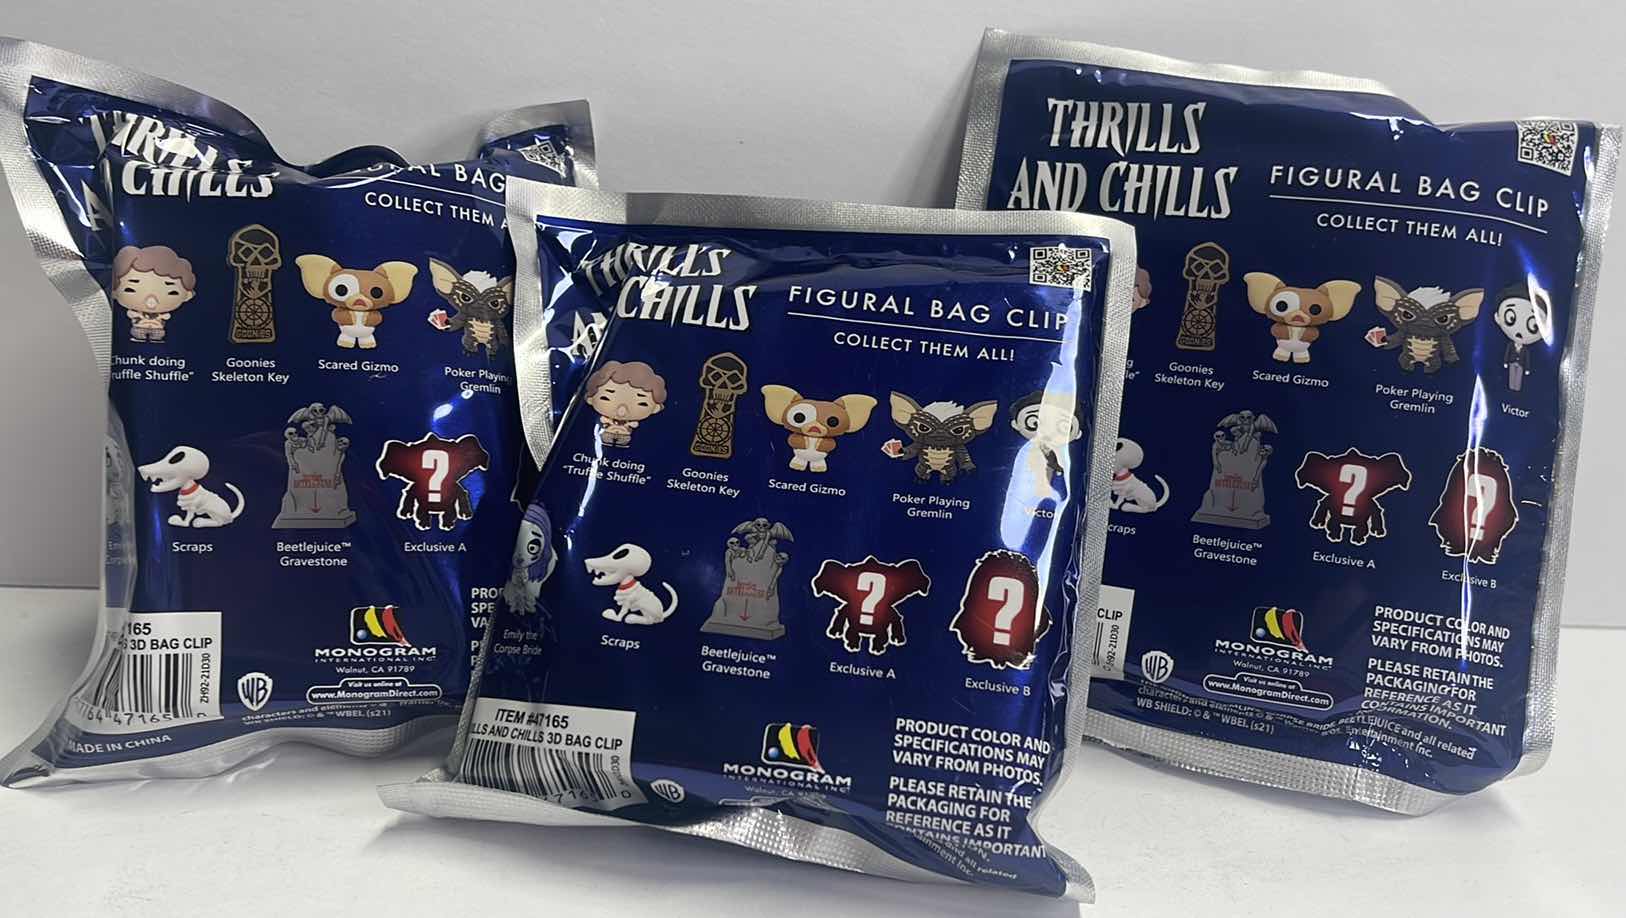 Photo 2 of NIB 3 THRILLS AND CHILLS FIGURAL BAG CLIPS RETAIL VALUE $35.00